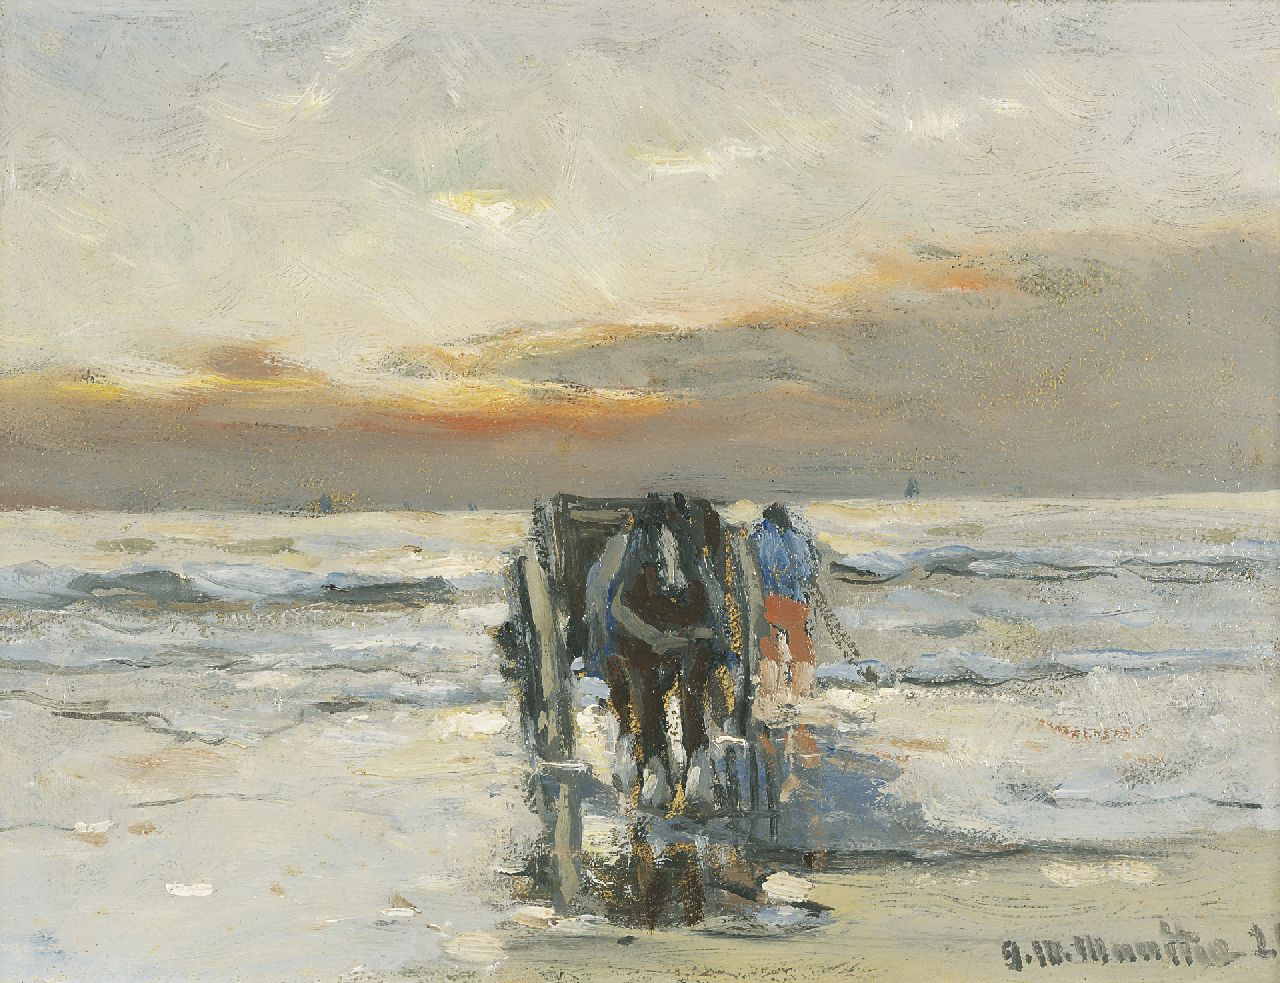 Munthe G.A.L.  | Gerhard Arij Ludwig 'Morgenstjerne' Munthe, Shell fishermen on the beach, oil on painter's board 18.3 x 24.3 cm, signed l.r. and dated '21